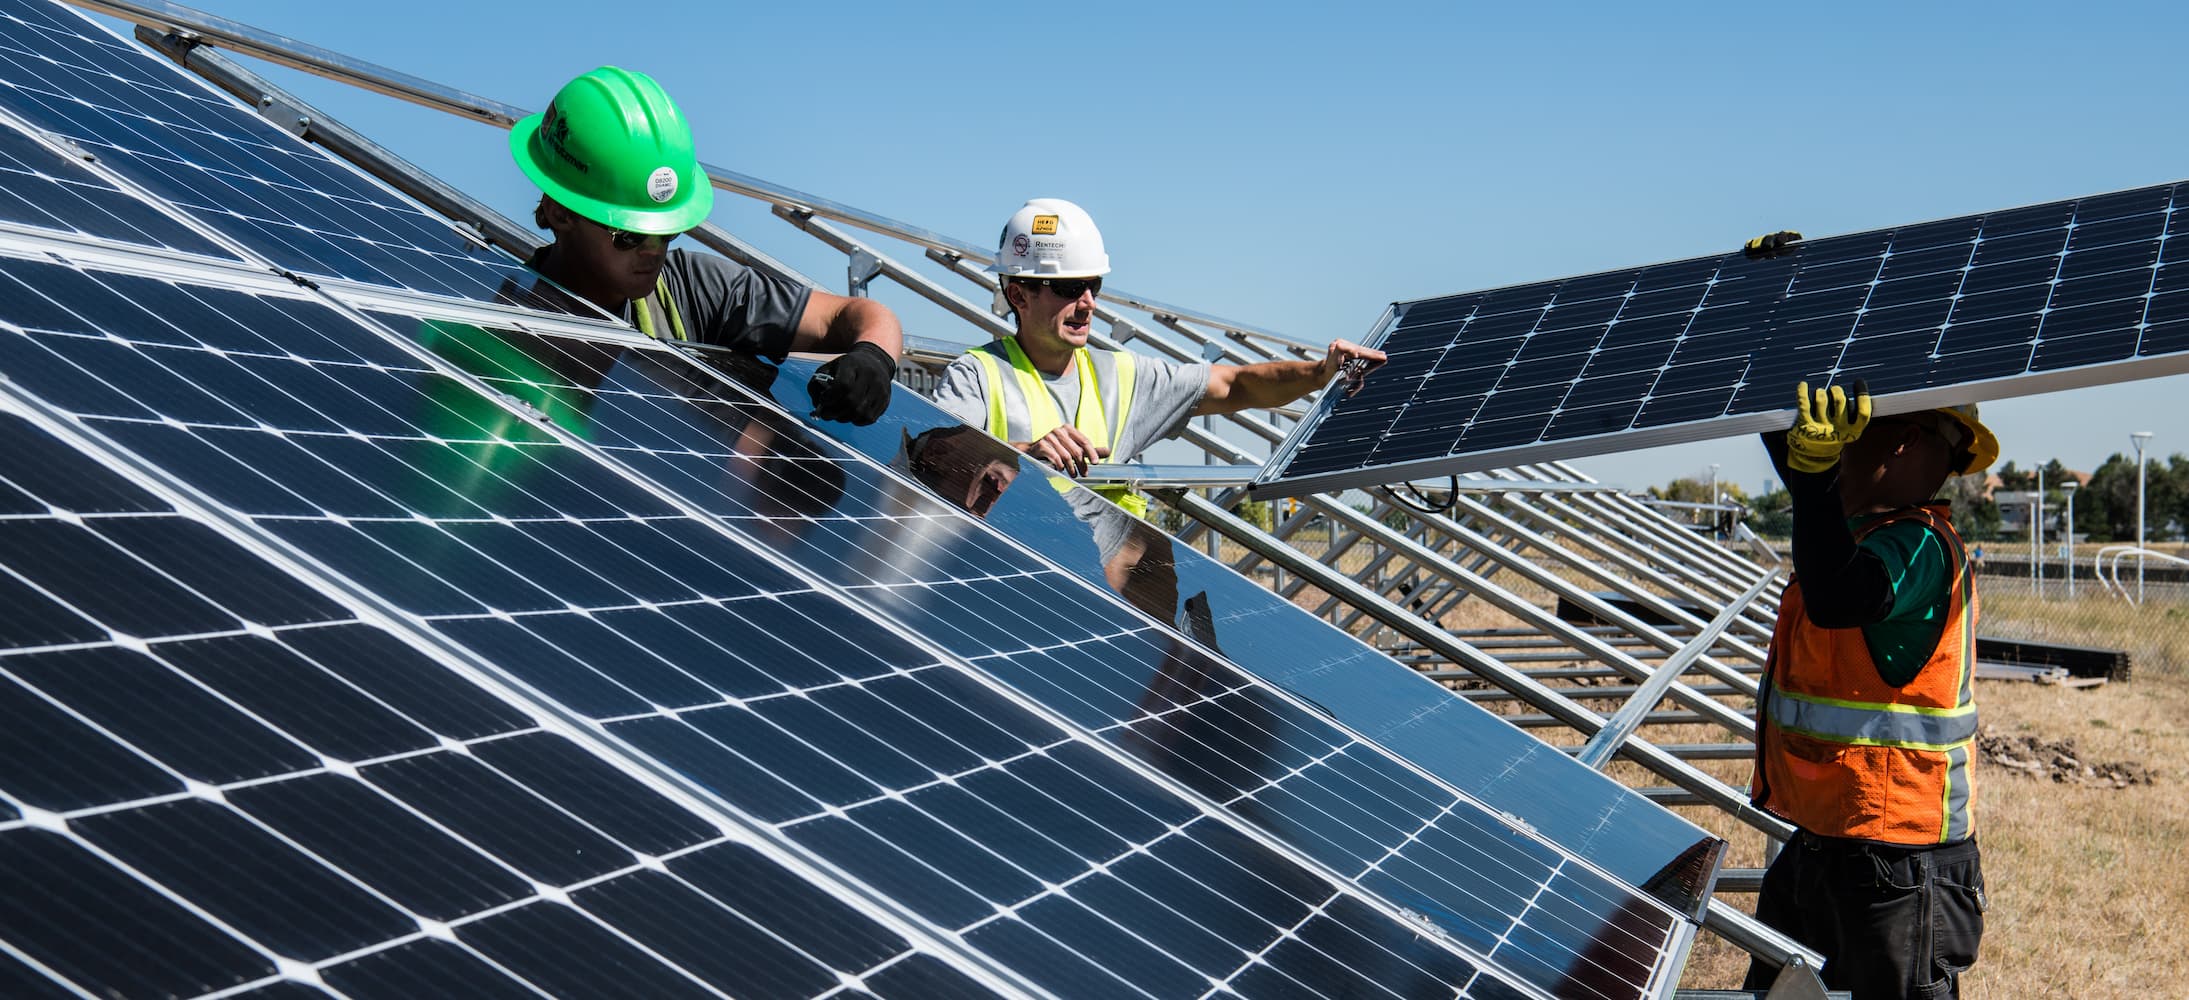 Solar workers